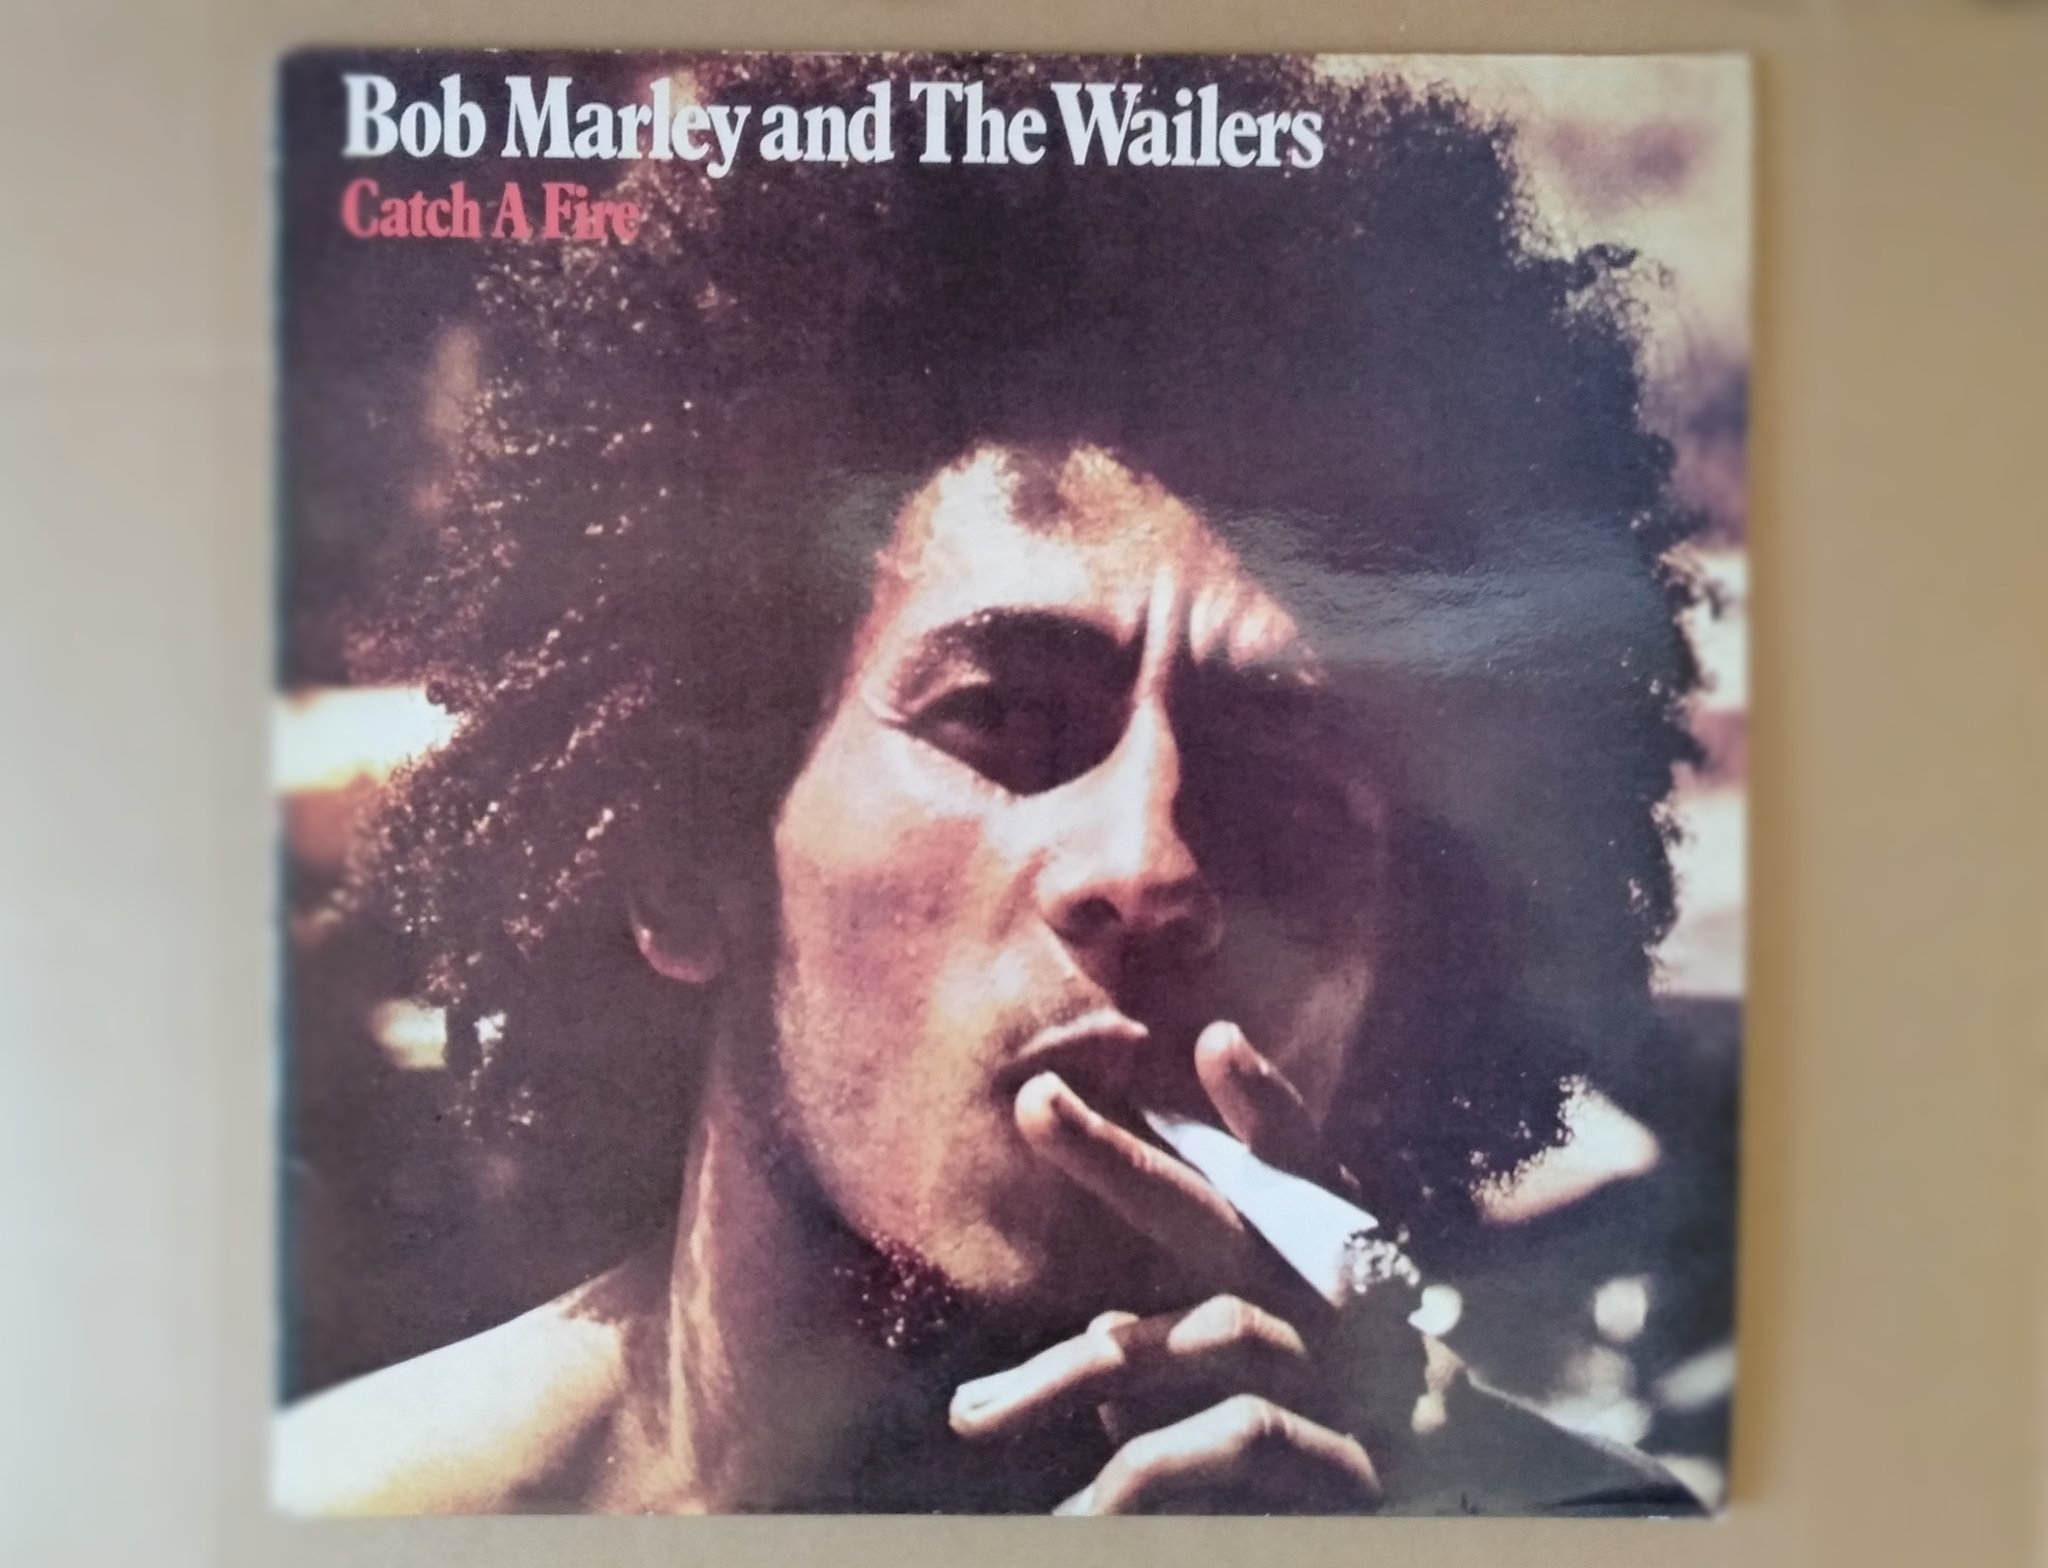 The Wailers / Catch a Fire (1973)

Slave driver, the table is turn (Catch a fire)

Happy Birthday, Bob Marley !!! 